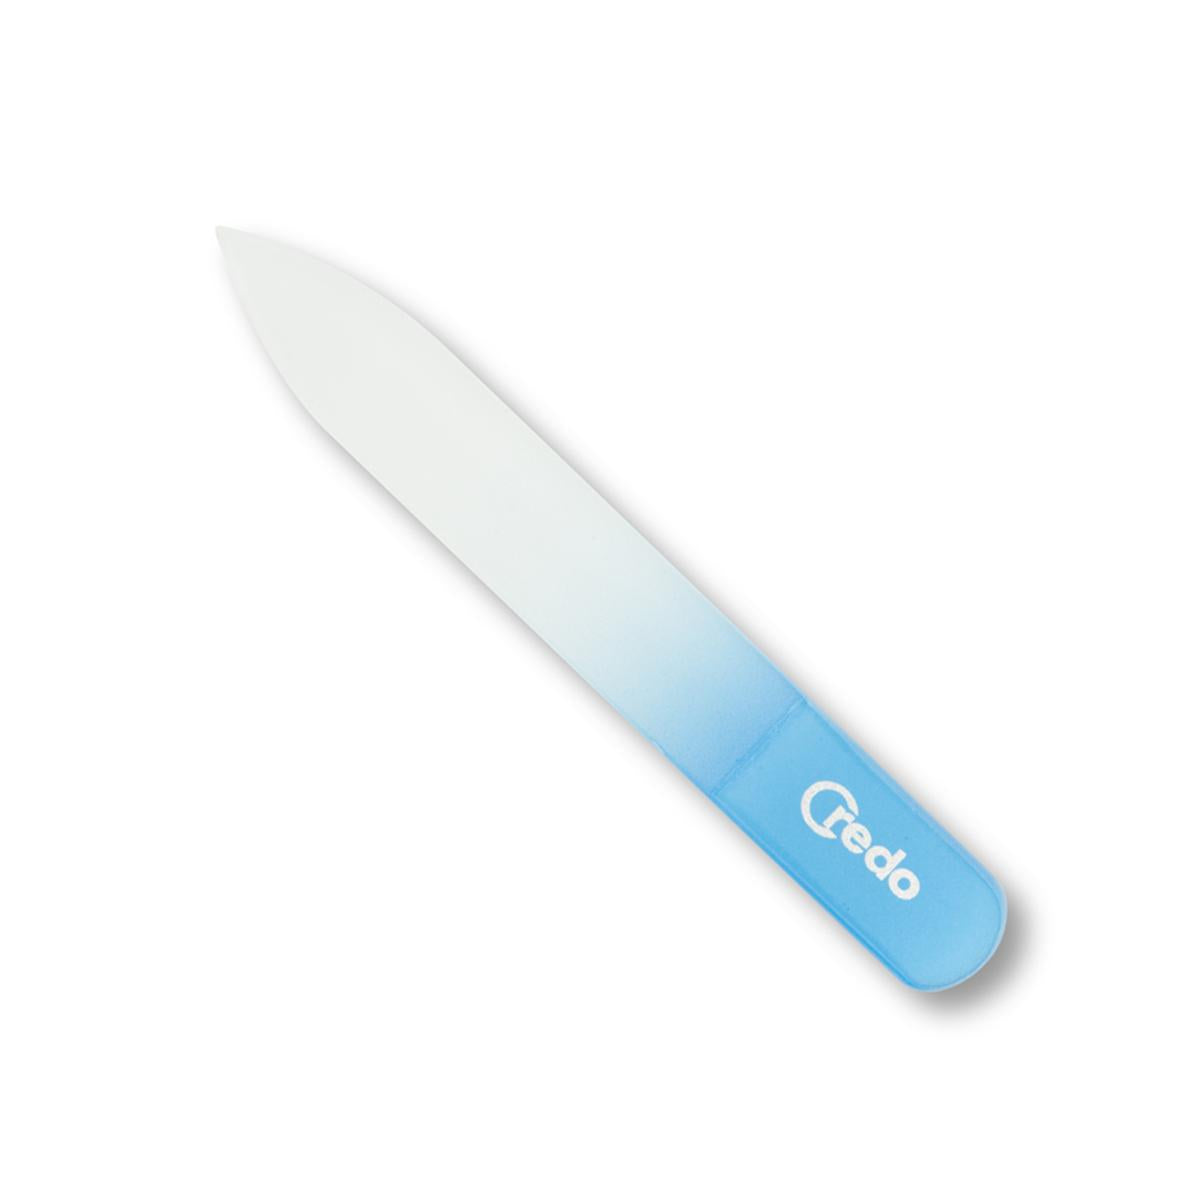 Primary image of Credo Small Blue Glass Nail File 90mm Nail File